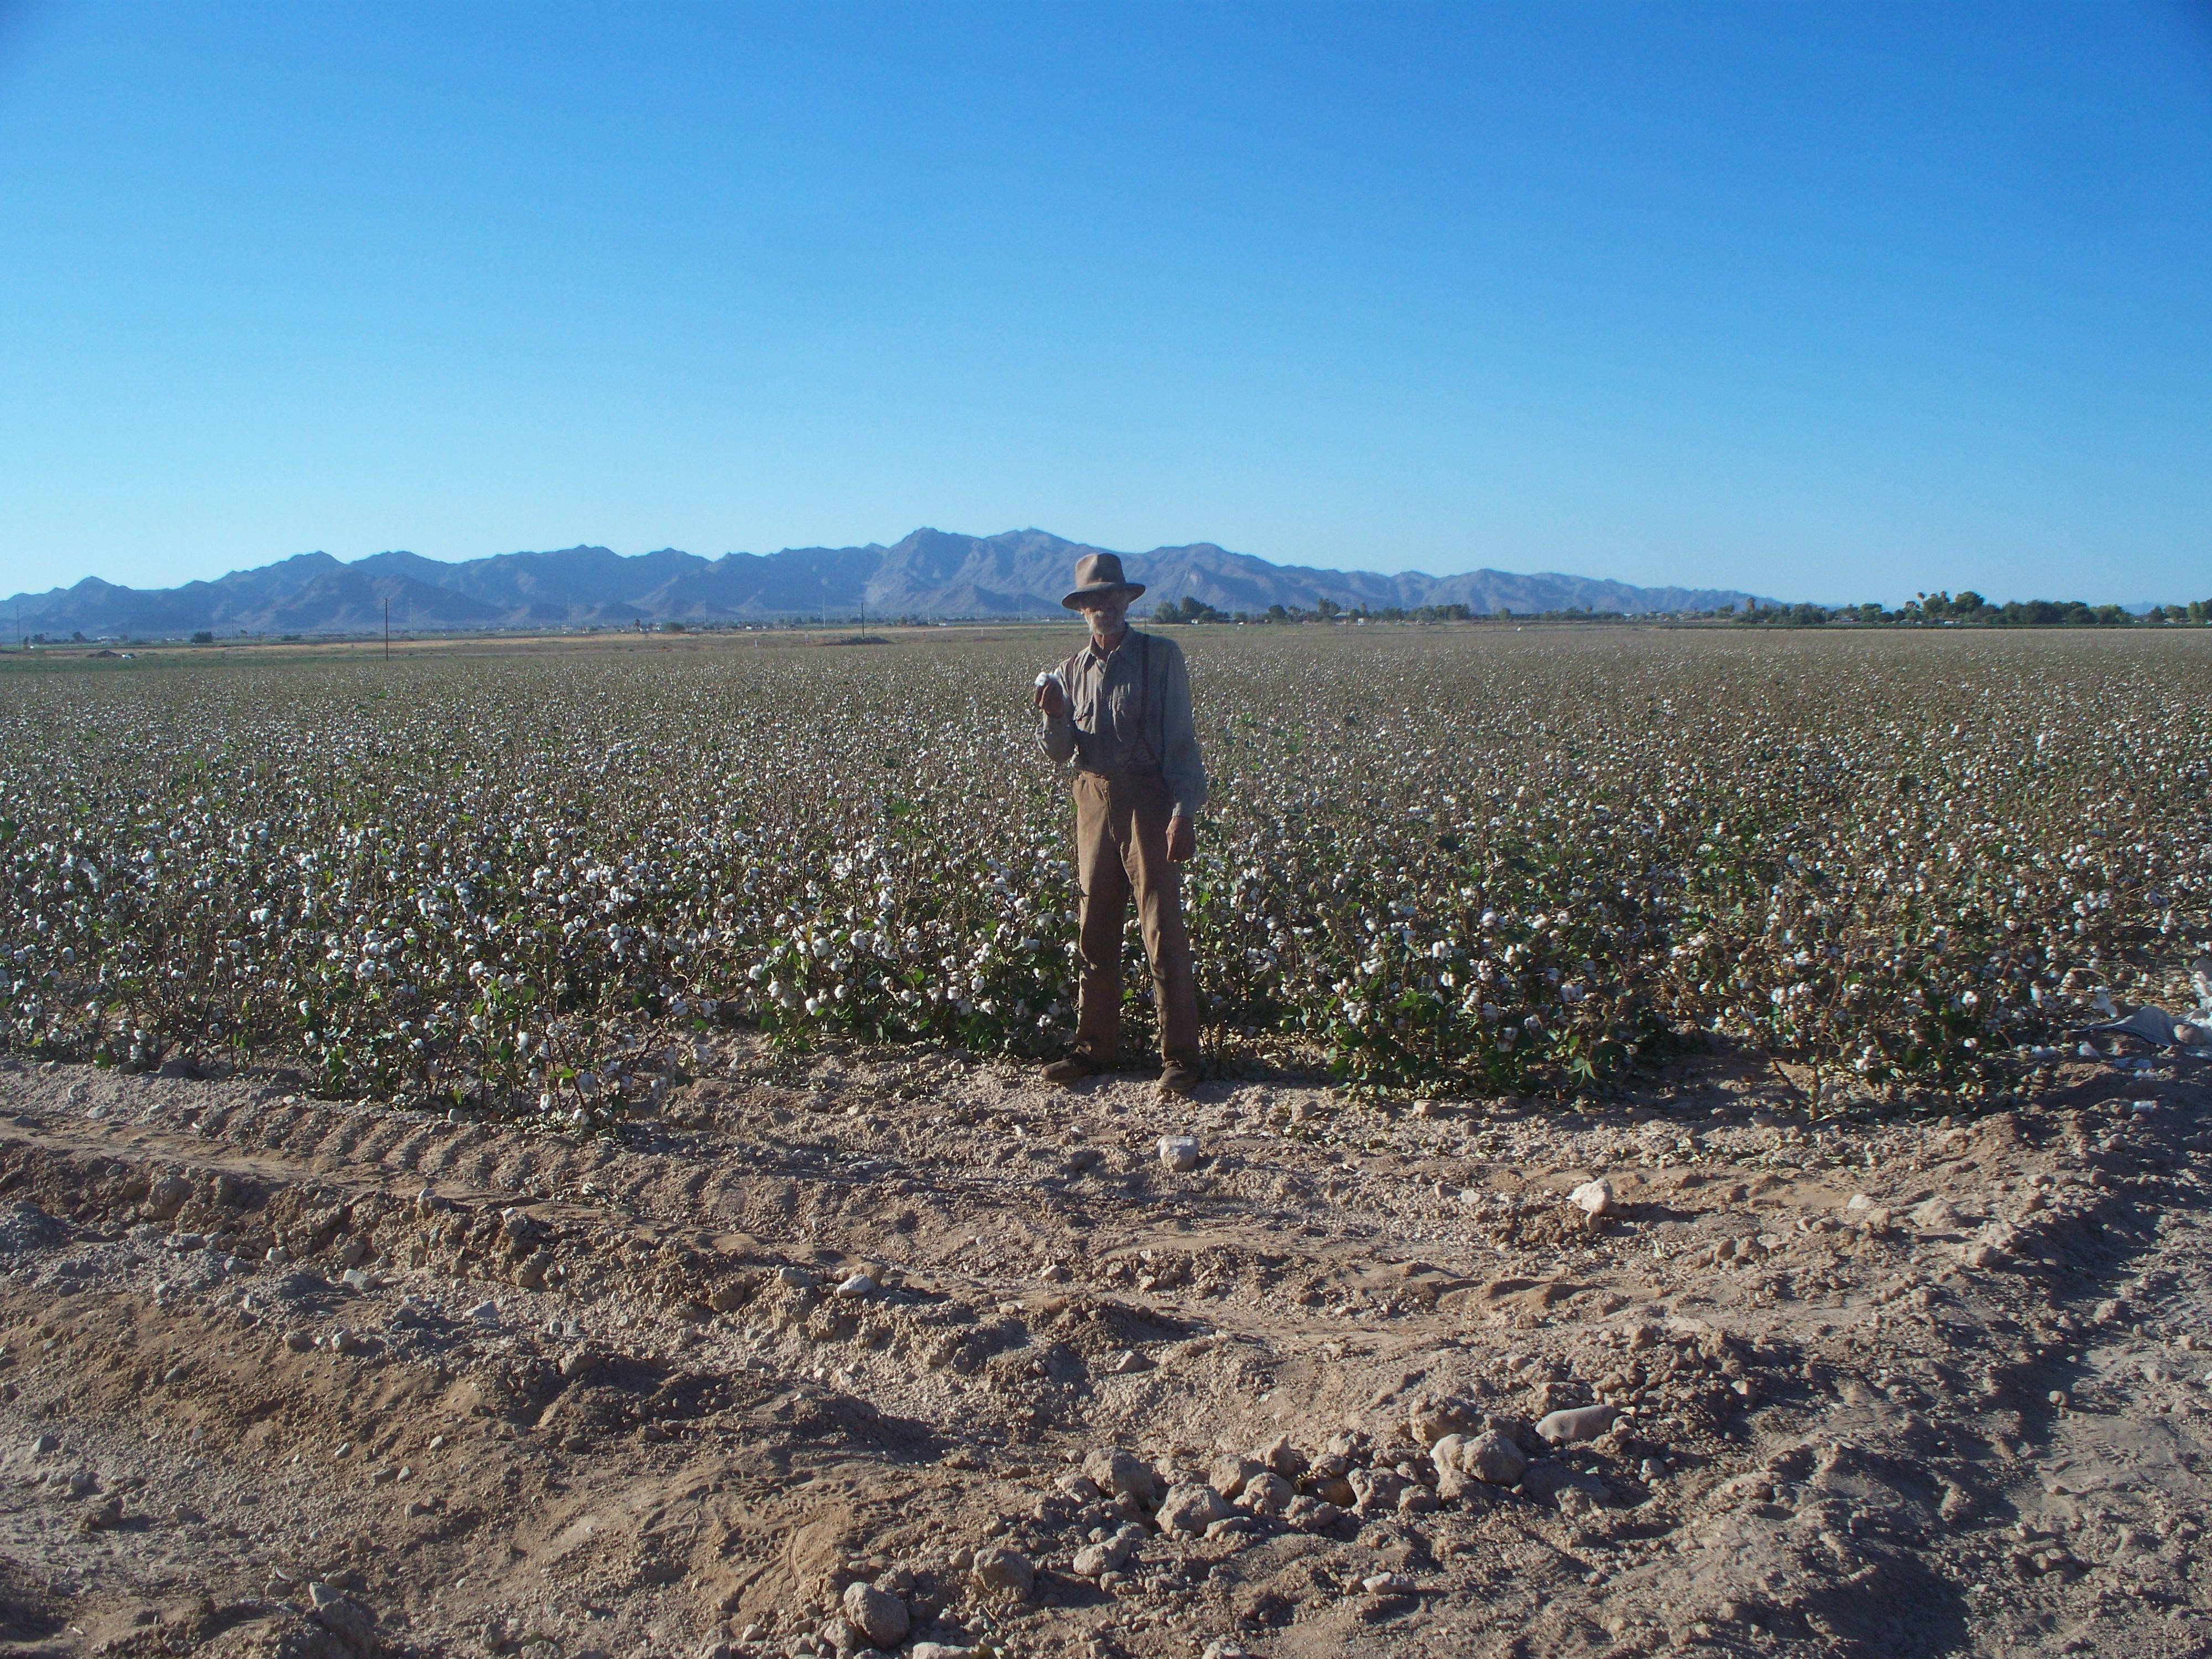 ALice Braga and I spent 3 hours learning how to pick Cotton and this is the closest I got! It paid well though.